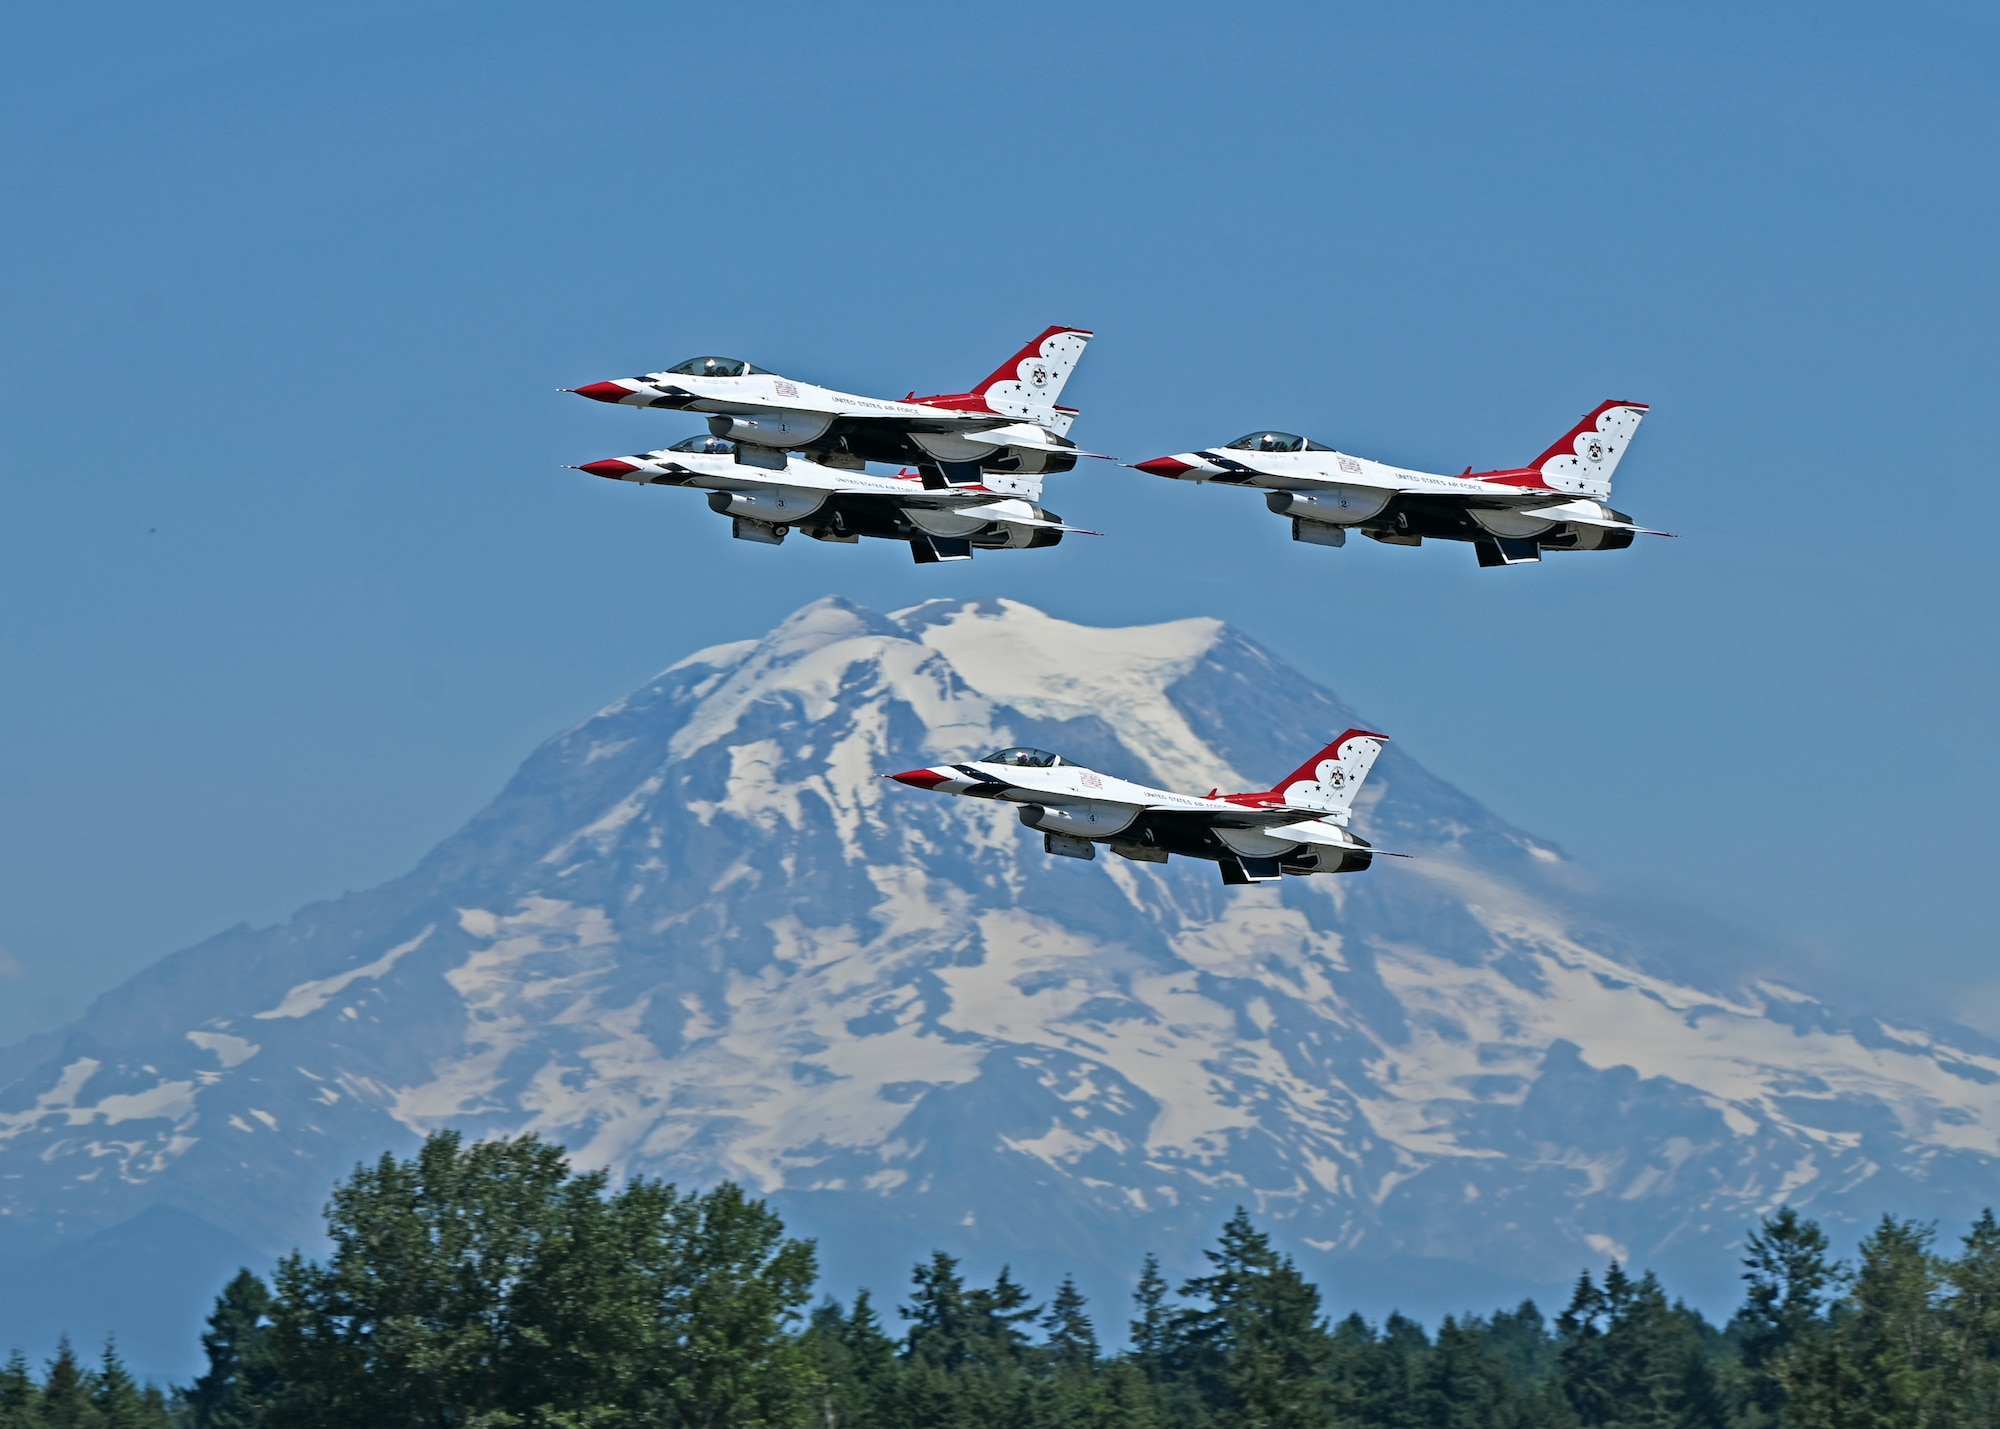 The U.S. Air Force Air Demonstration Squadron “Thunderbirds” #1-4 fly F-16 Fighting Falcons above the McChord Field flightline during their rehearsal for the Joint Base Lewis-McChord Airshow and Warrior Expo at JBLM, Washington, July 14, 2023. The mission of the JAWE is to foster goodwill to educate and familiarize attendees with the people, mission, and equipment of the Air Force, Army, and other Armed Services while continuing to provide installation-wide mission support. The U.S. Air Force Air Demonstration Squadron “Thunderbirds” are one of the JAWE’s premier acts and will be joined by aerial demonstrations from the C-17 West Coast Demonstration Team, Tora! Tora! Tora! and many more. (U.S. Air Force photo by Senior Airman Callie Norton)